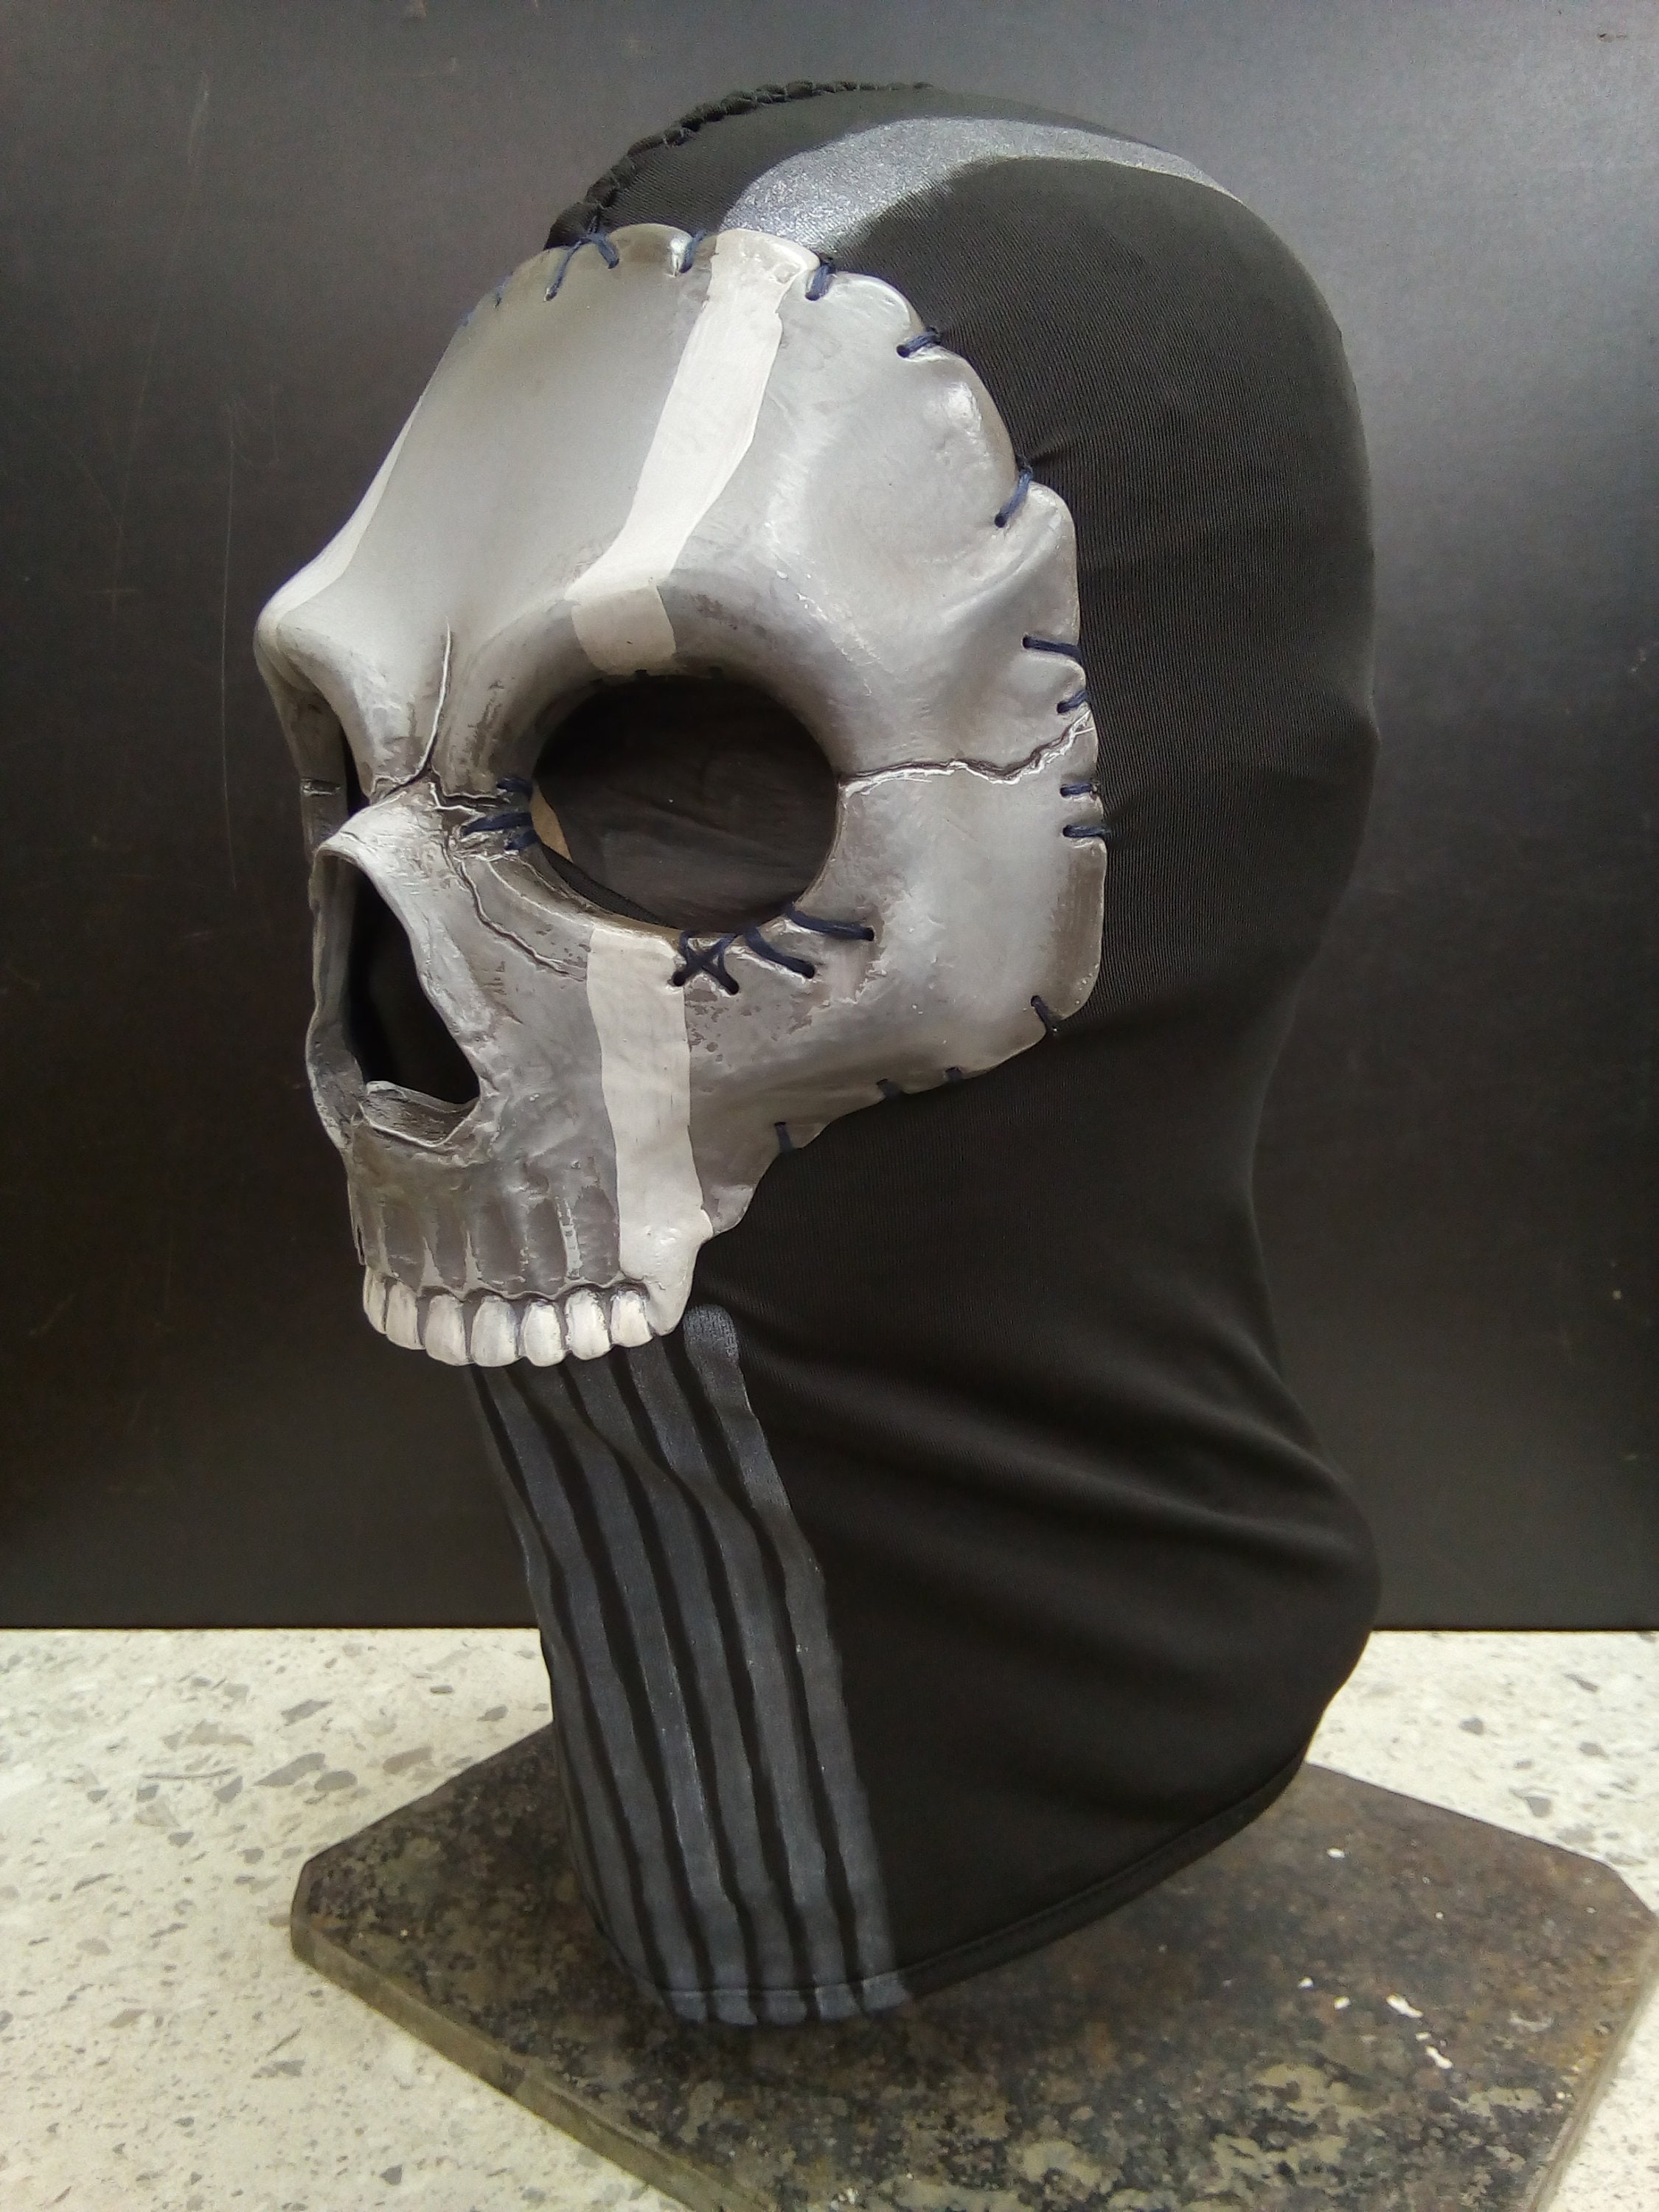 Call Of Duty Ghost Mask For Adult Balaclava Hat Skull Face Mask